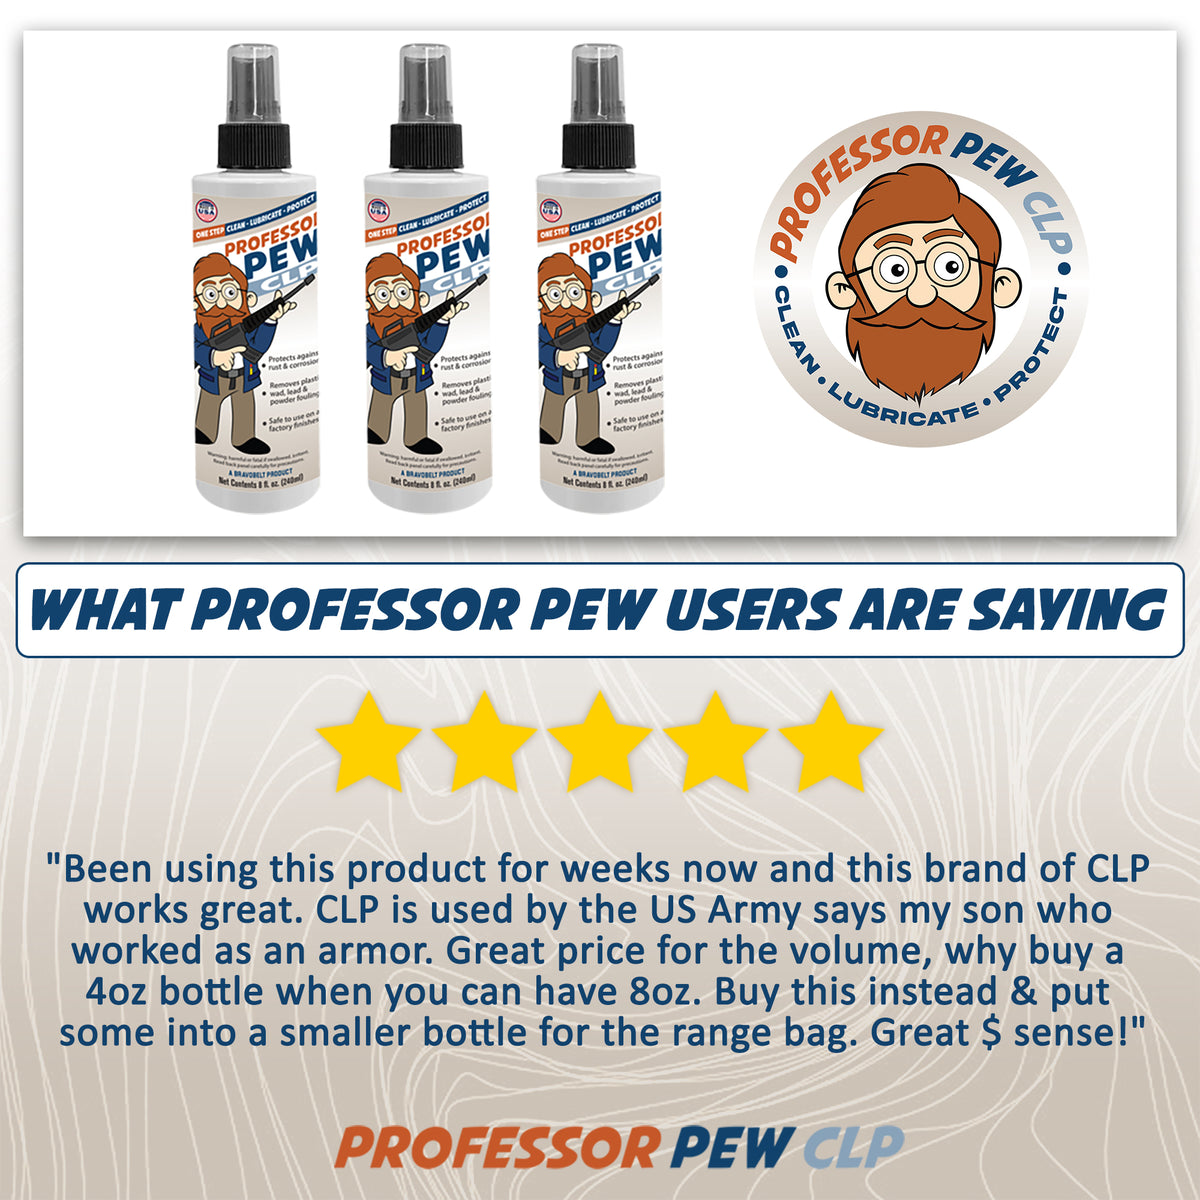 Professor Pew Gun Rust Remover – Clean, Lube, and Protect against Build-Up | Military Grade CLP Degreaser Oil for all Firearms